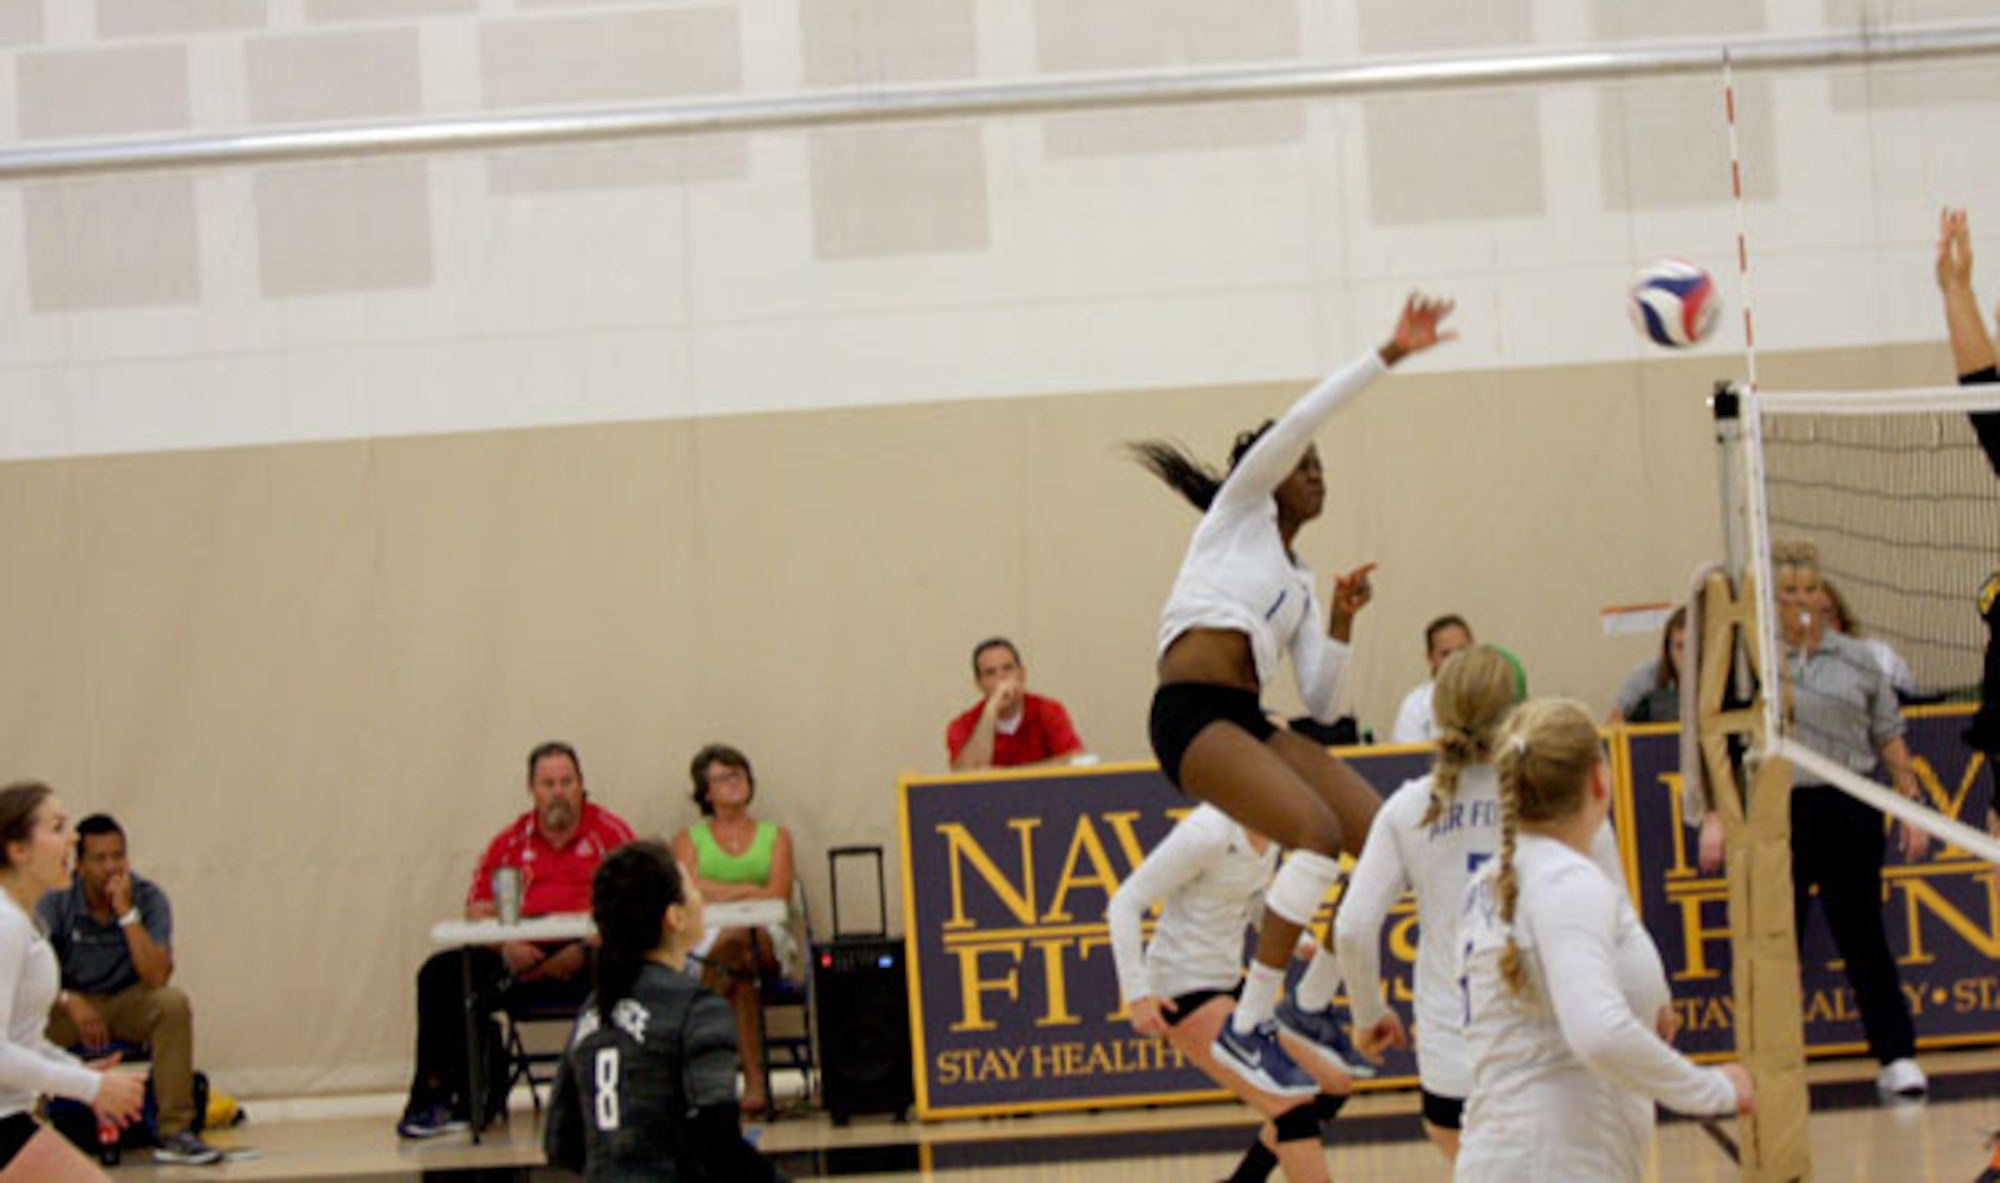 Outside hitter 2nd Lt. Felicia Clement of the 62nd Maintenance Squadron at Joint Base Lewis-McChord, Washington, attempts a kill during the Armed Forces Volleyball Championship. (U.S. Air Force photo by Steve Brown)